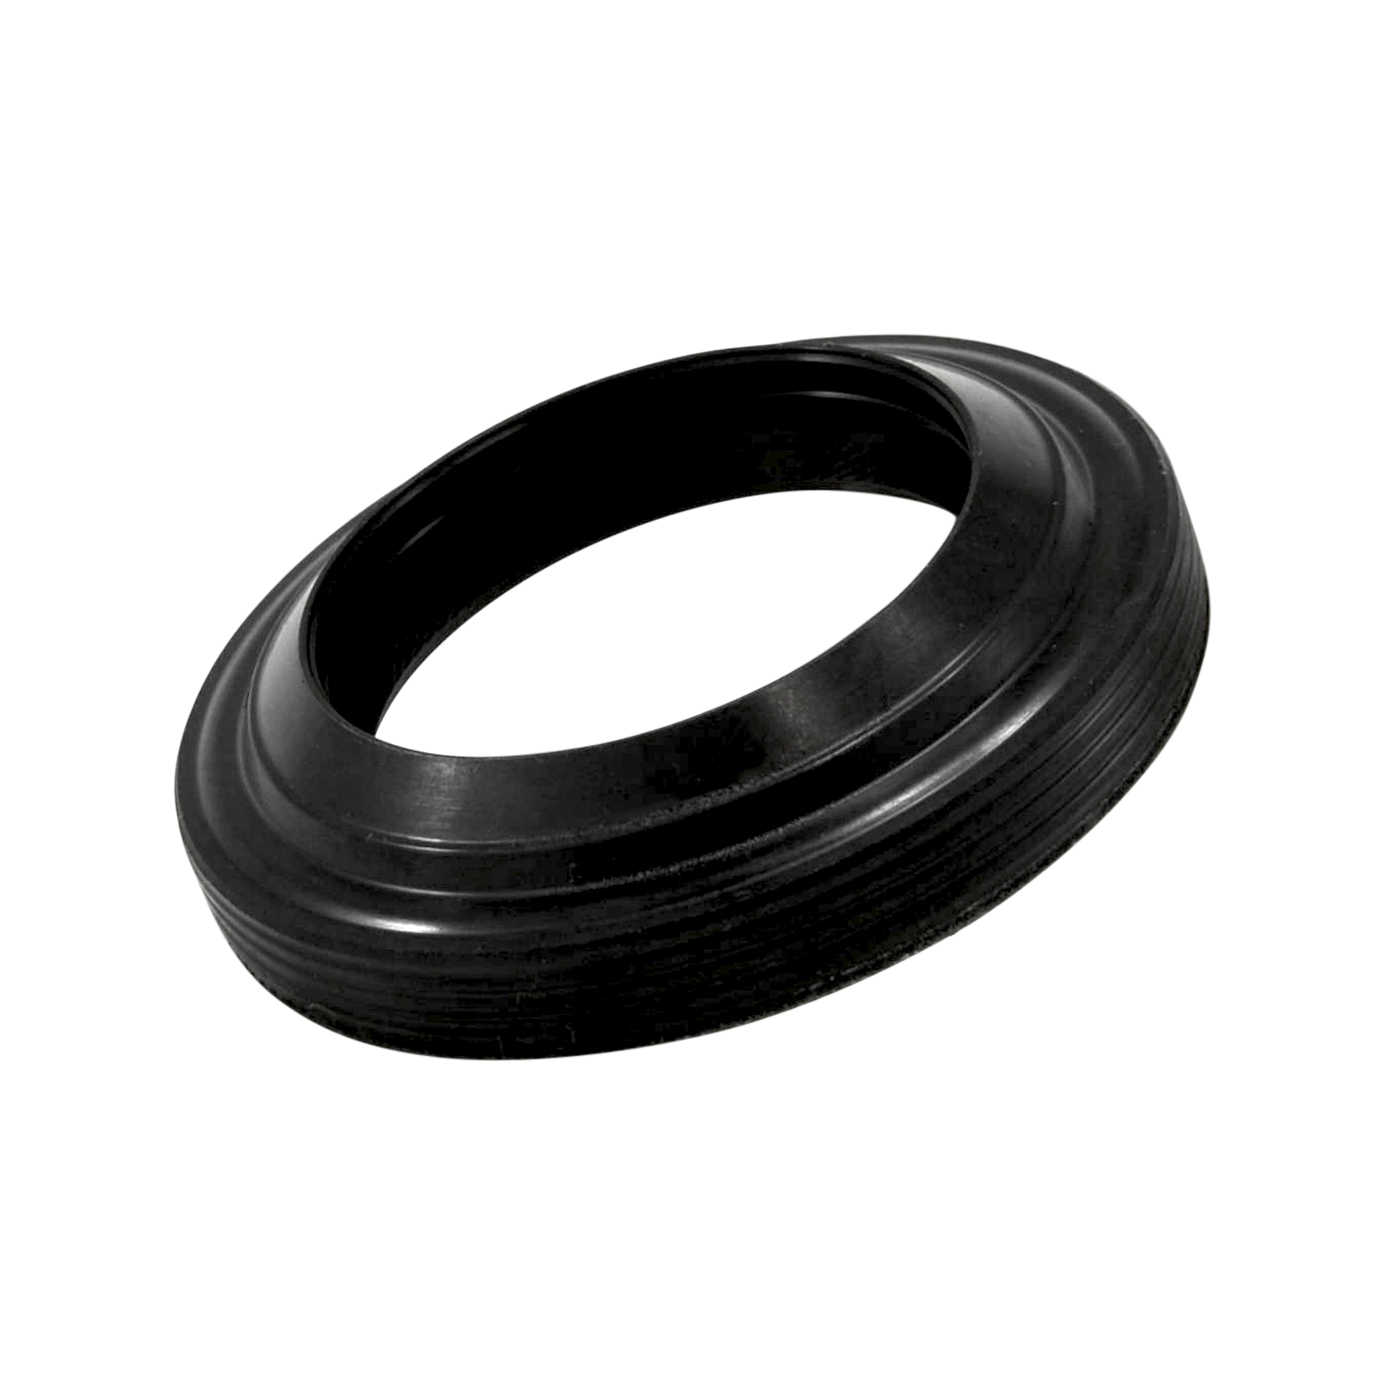 Replacement rear axle seal for Jeep JK Dana 44 